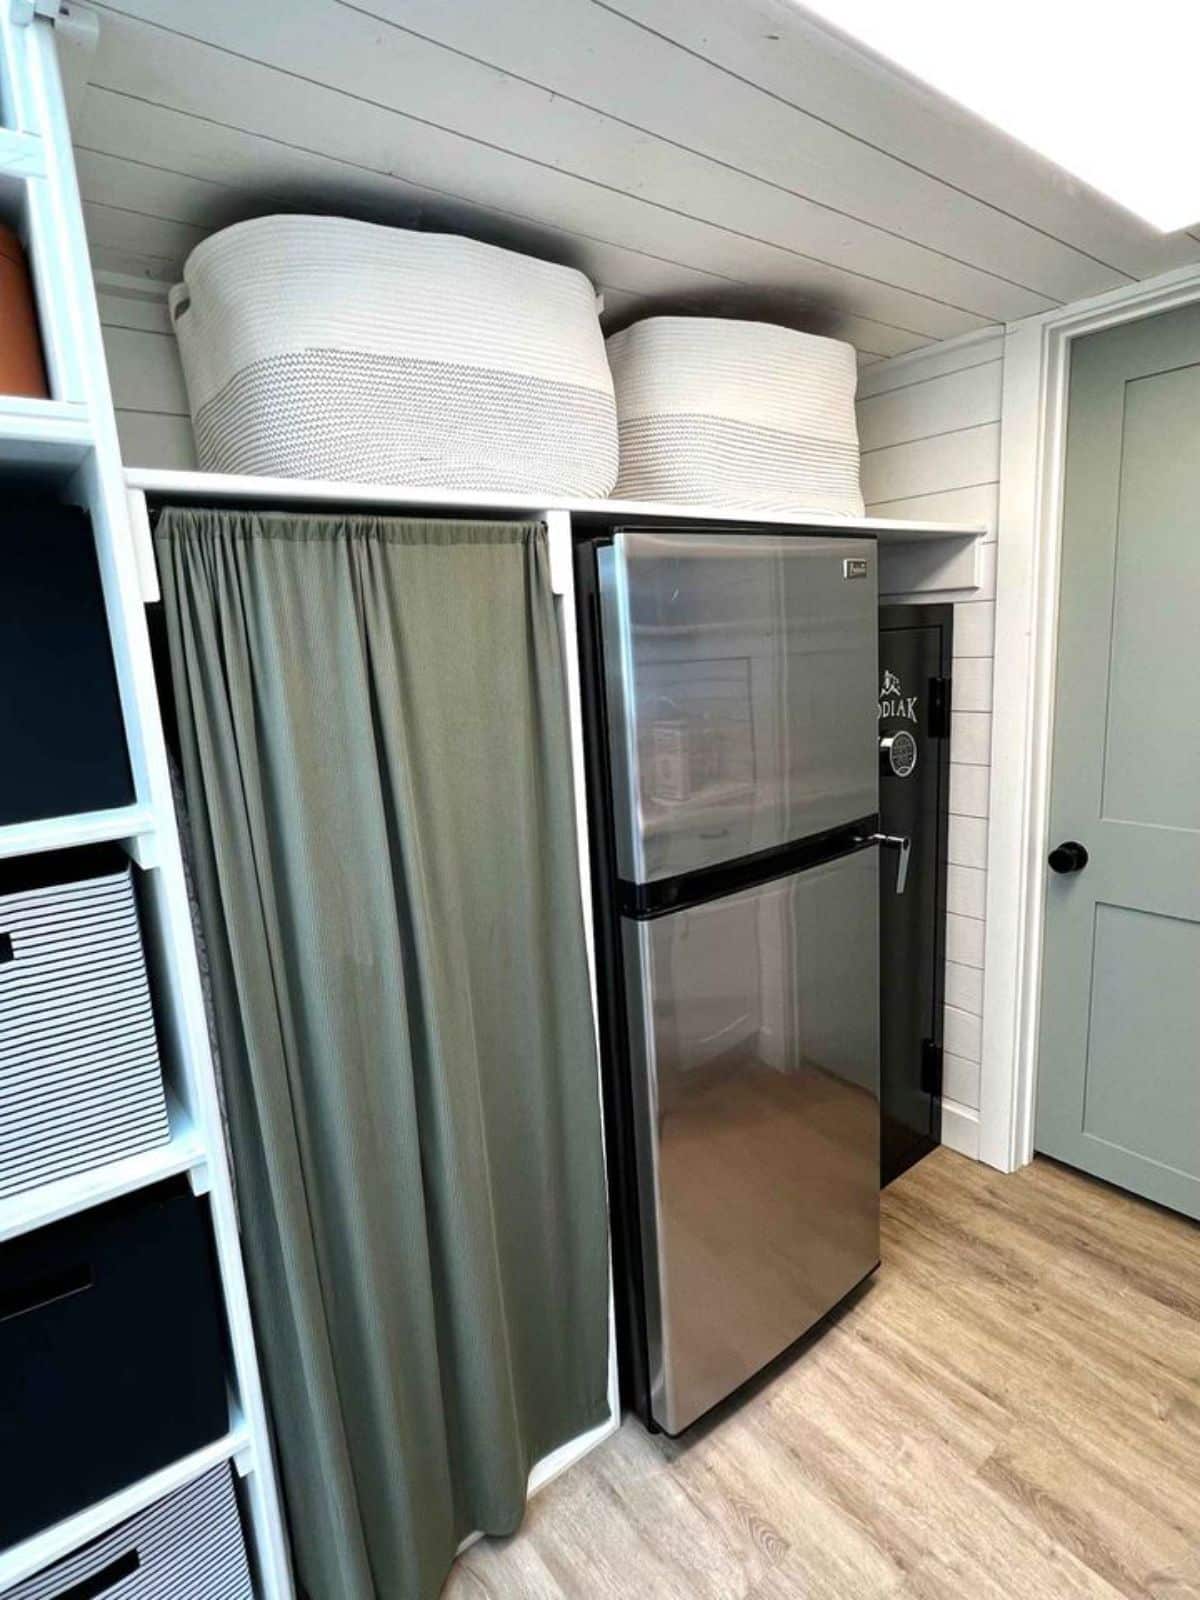 opposite side has a doble door refrigerator and other storage cabinets